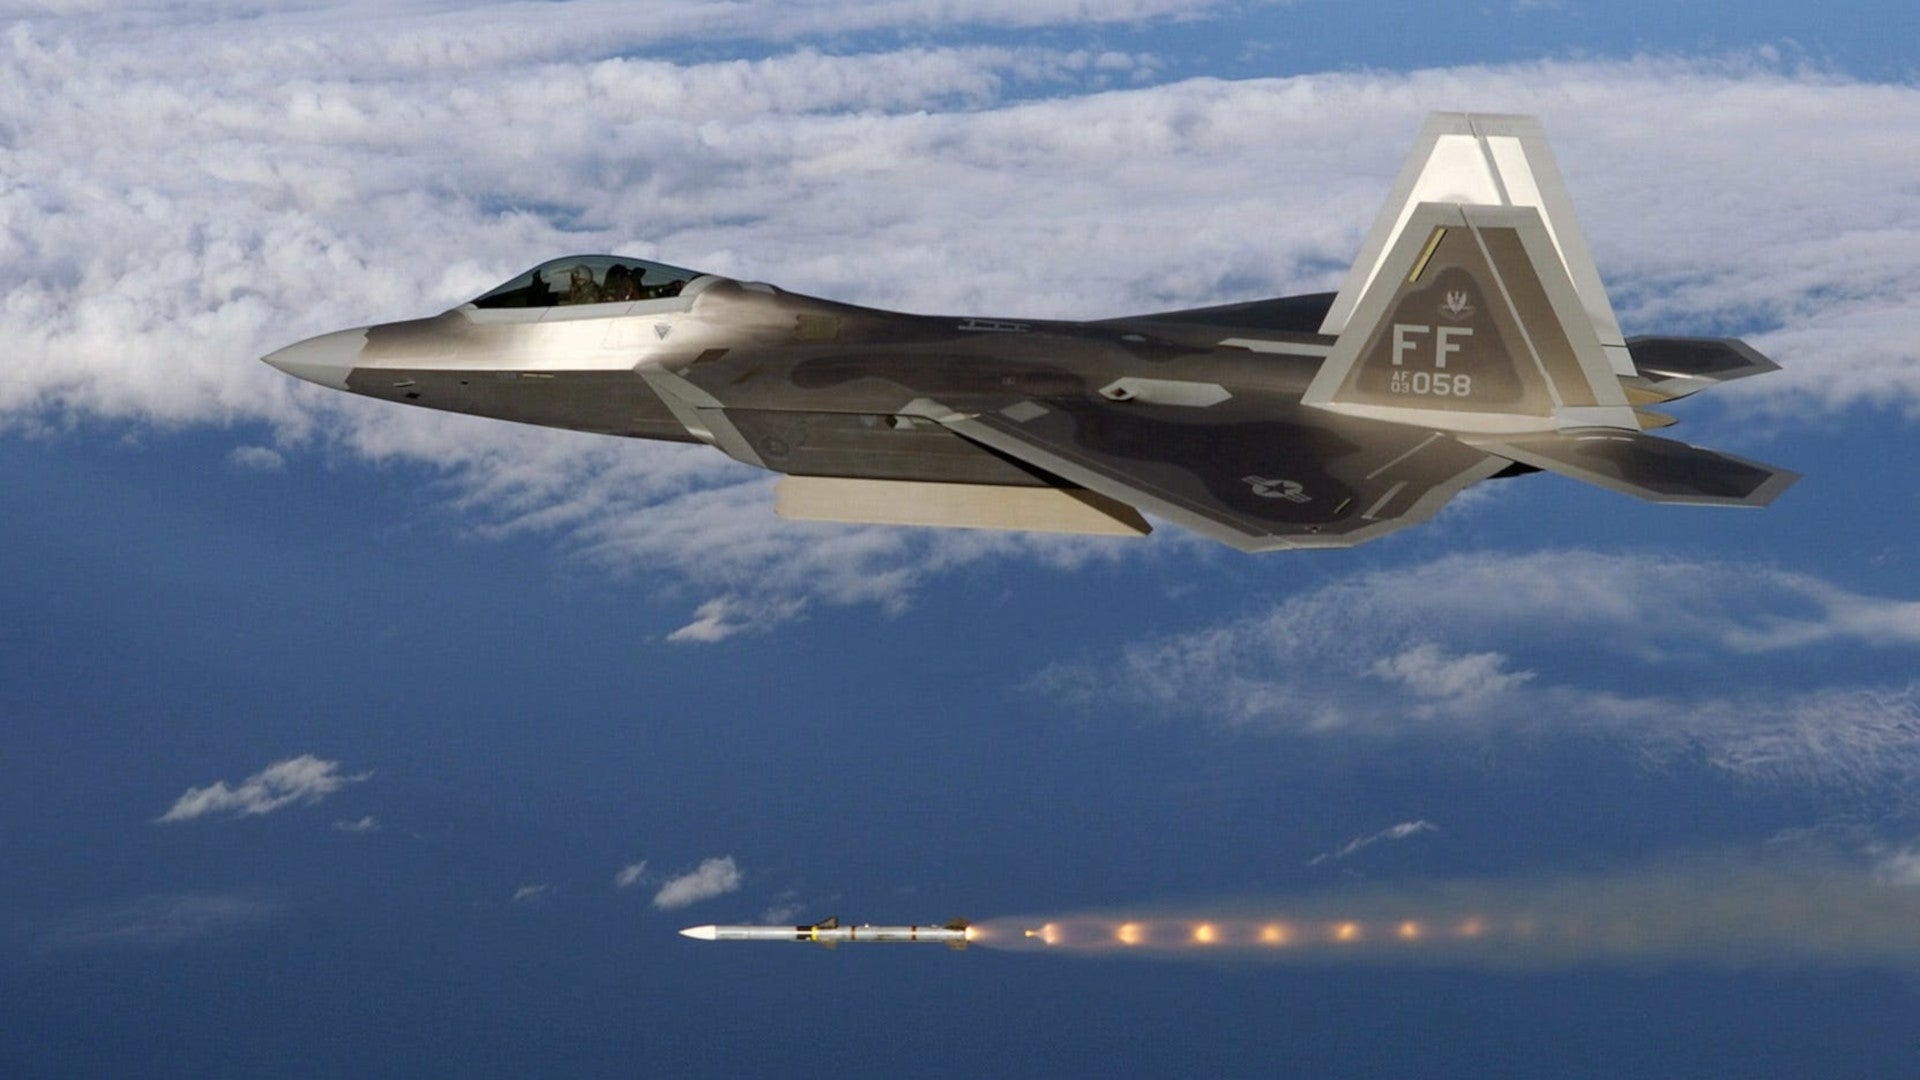 Meet The AIM The Air Force And Navy's Future Long Range Air To Air Missile